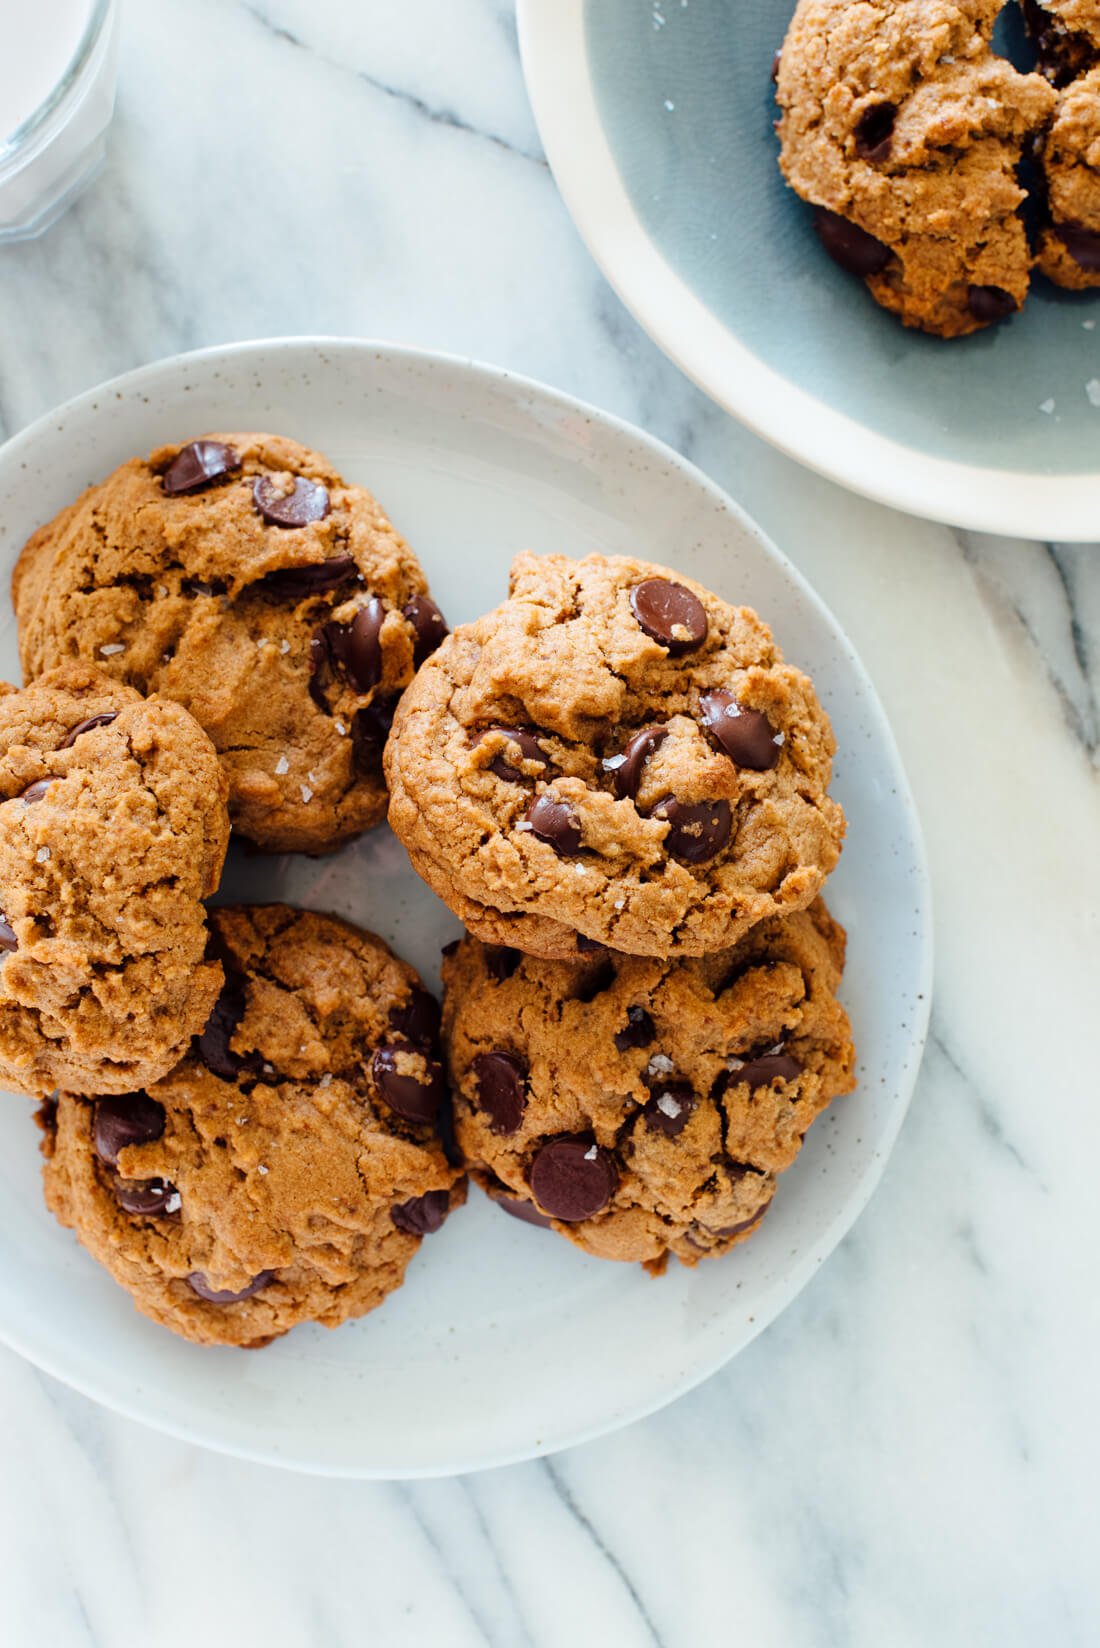 The best chocolate chip cookies recipe! These cookies don't require a mixer or an overnight rest, AND they just-so-happen to be vegan. #dairyfree #eggfree #cookierecipe #chocolate